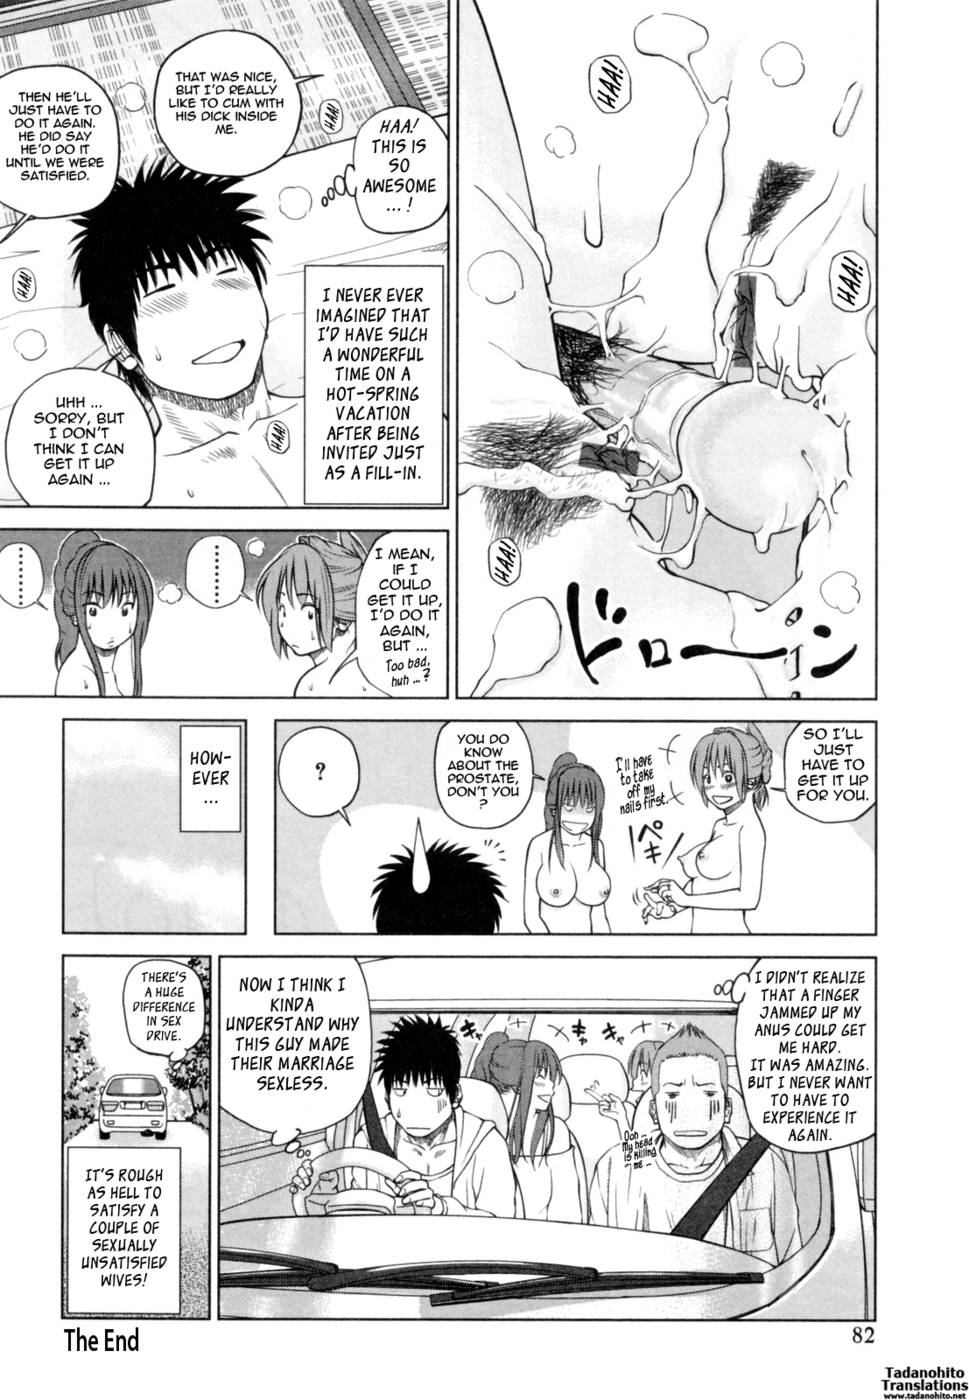 Hentai Manga Comic-32 Year Old Unsatisfied Wife-Chapter 4-Hot Spring Get-Together-A Friend's Wife-20